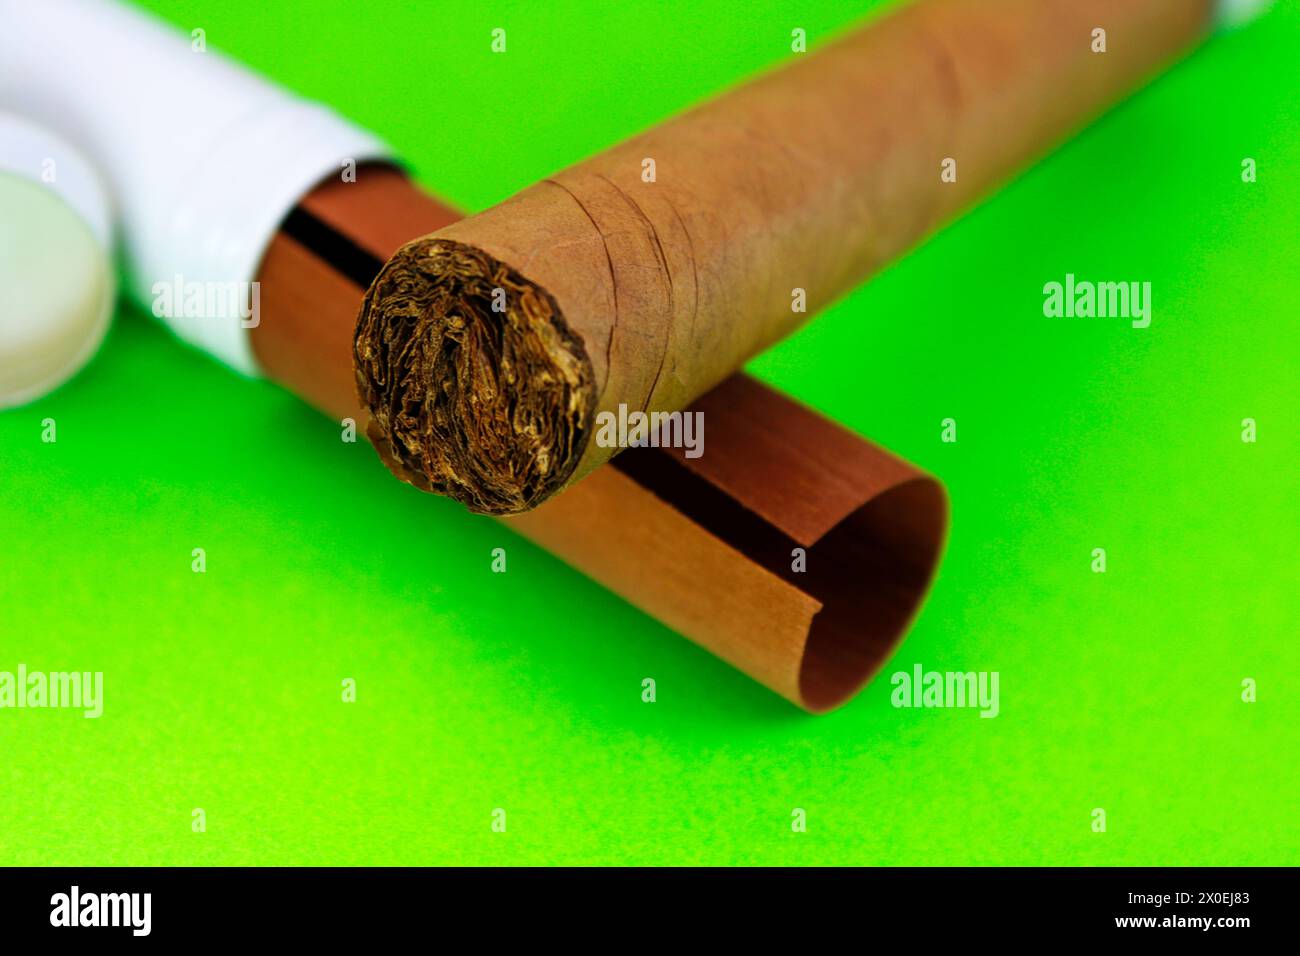 Tobacco out of its container on cedar sheet Stock Photo